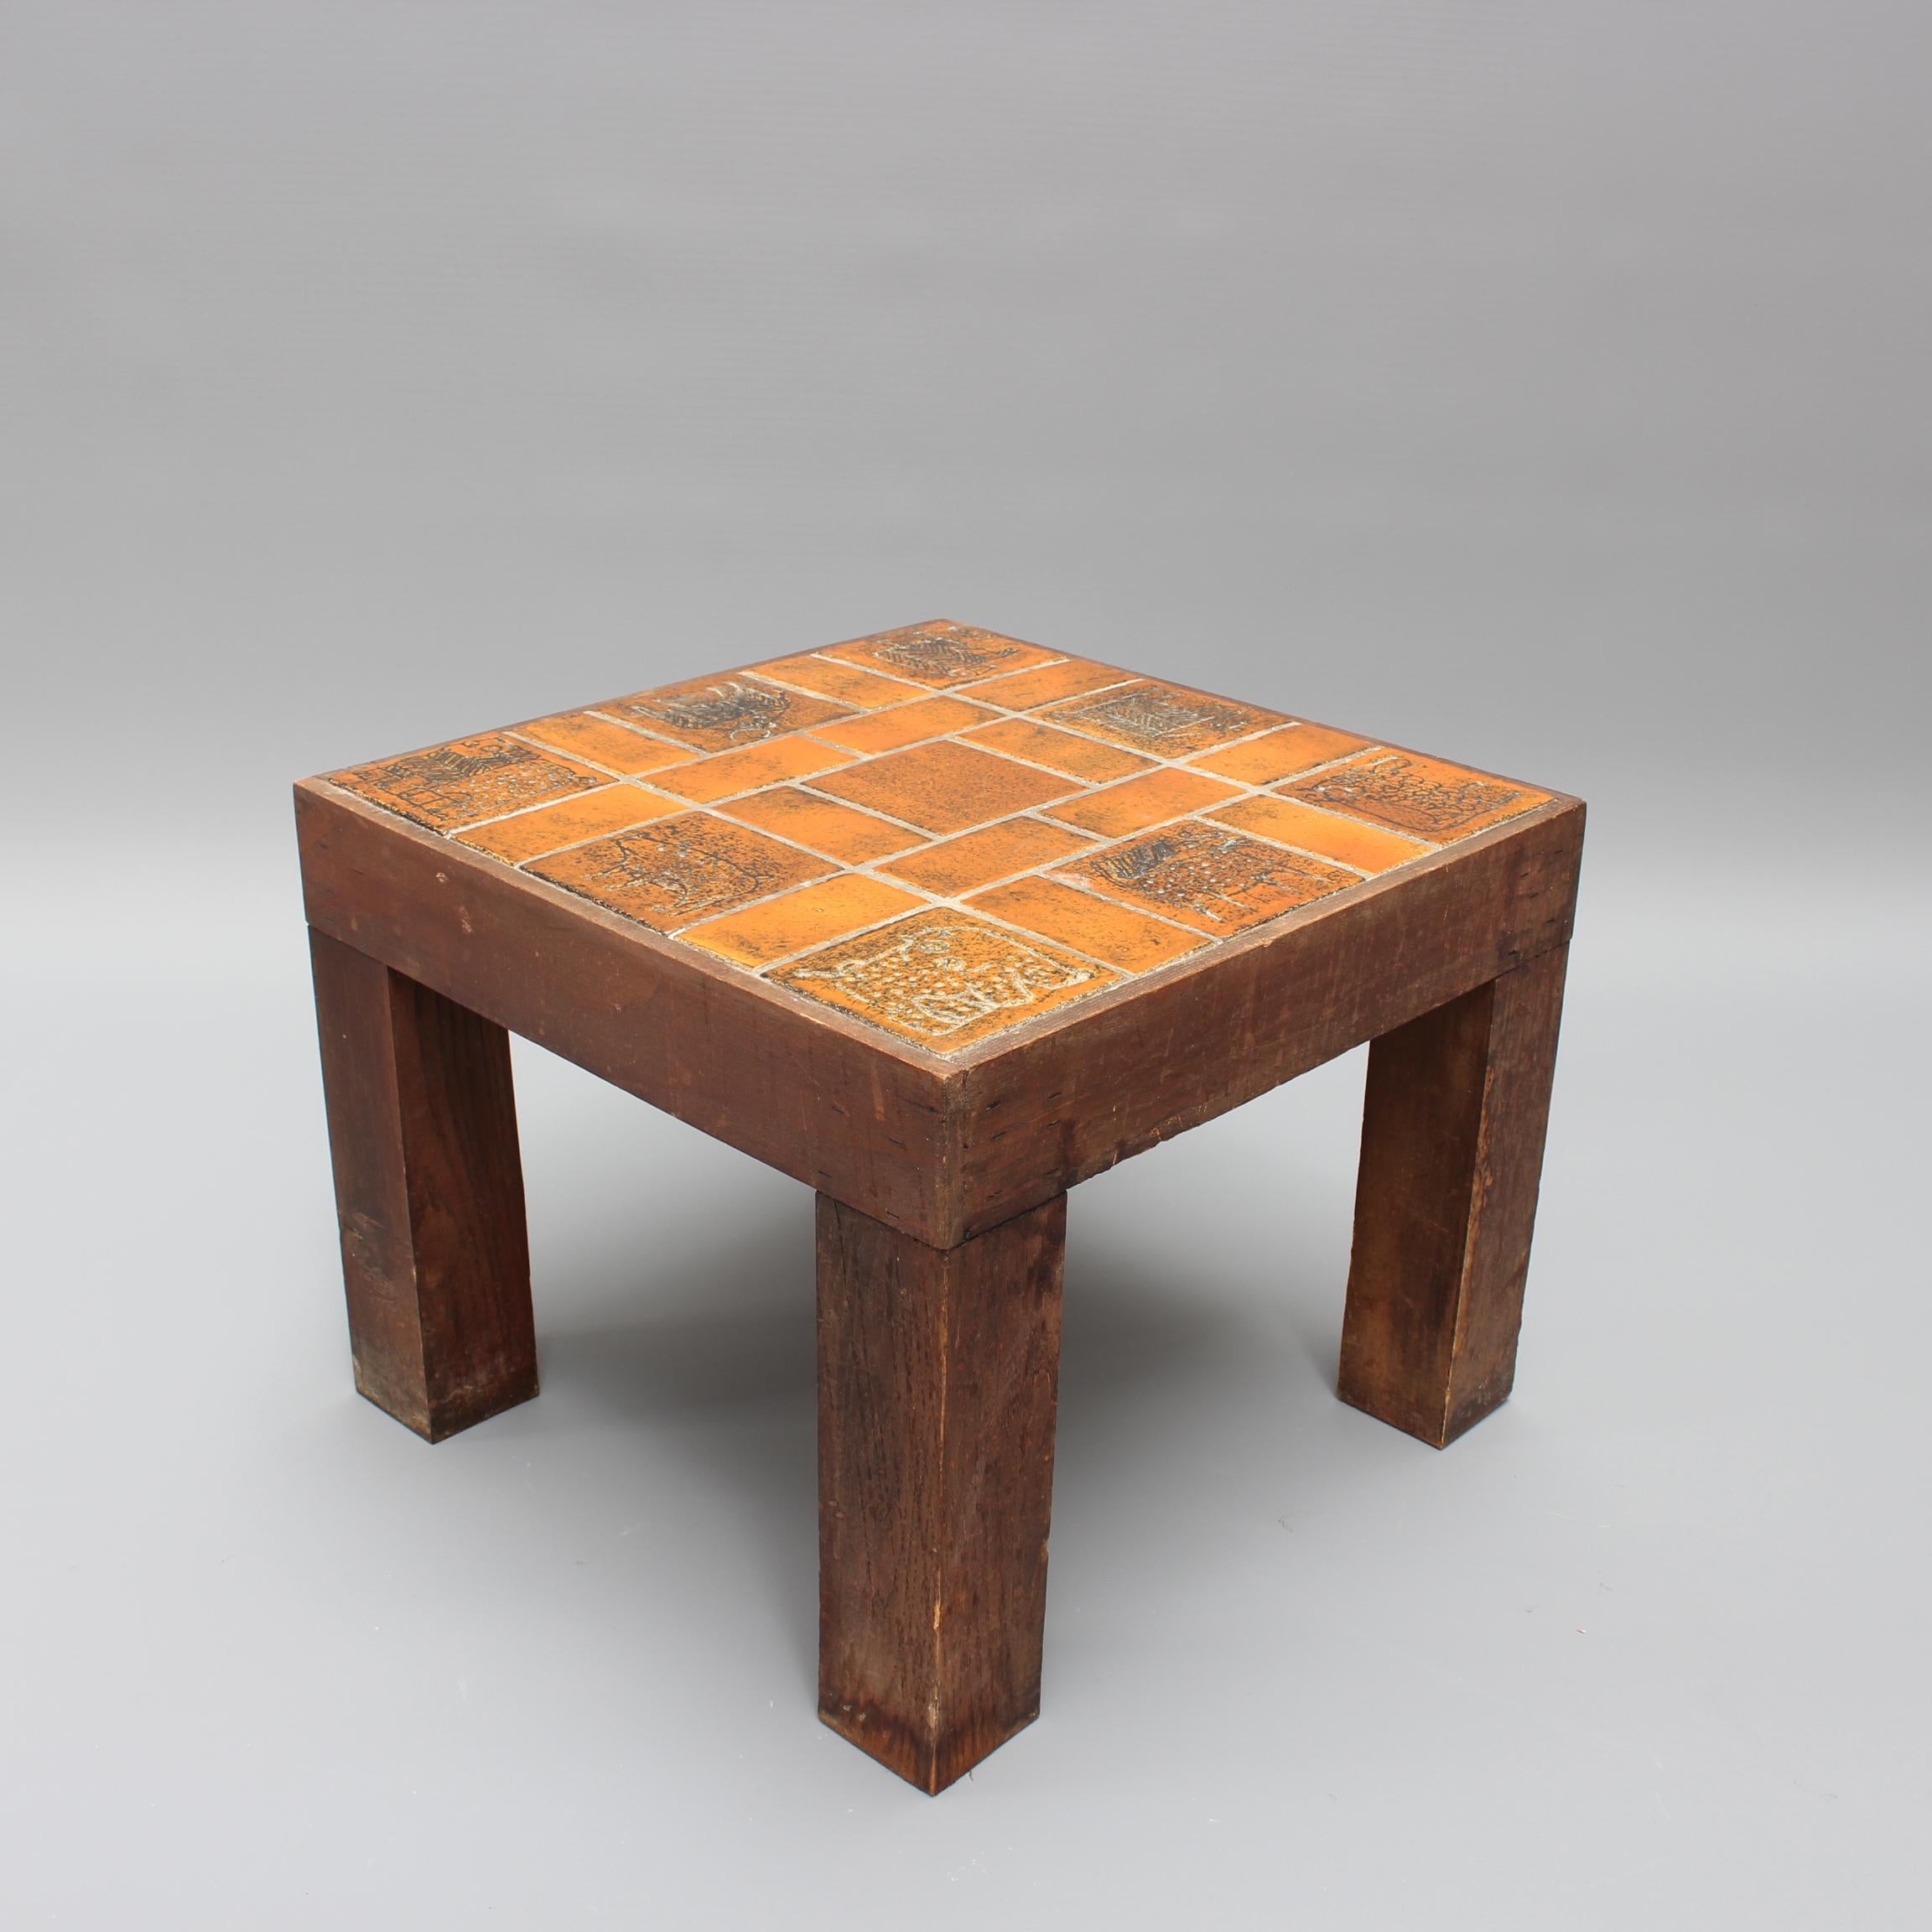 Vintage French Square Side Table with Ceramic Tile Top by Jacques Blin, c. 1950s For Sale 4